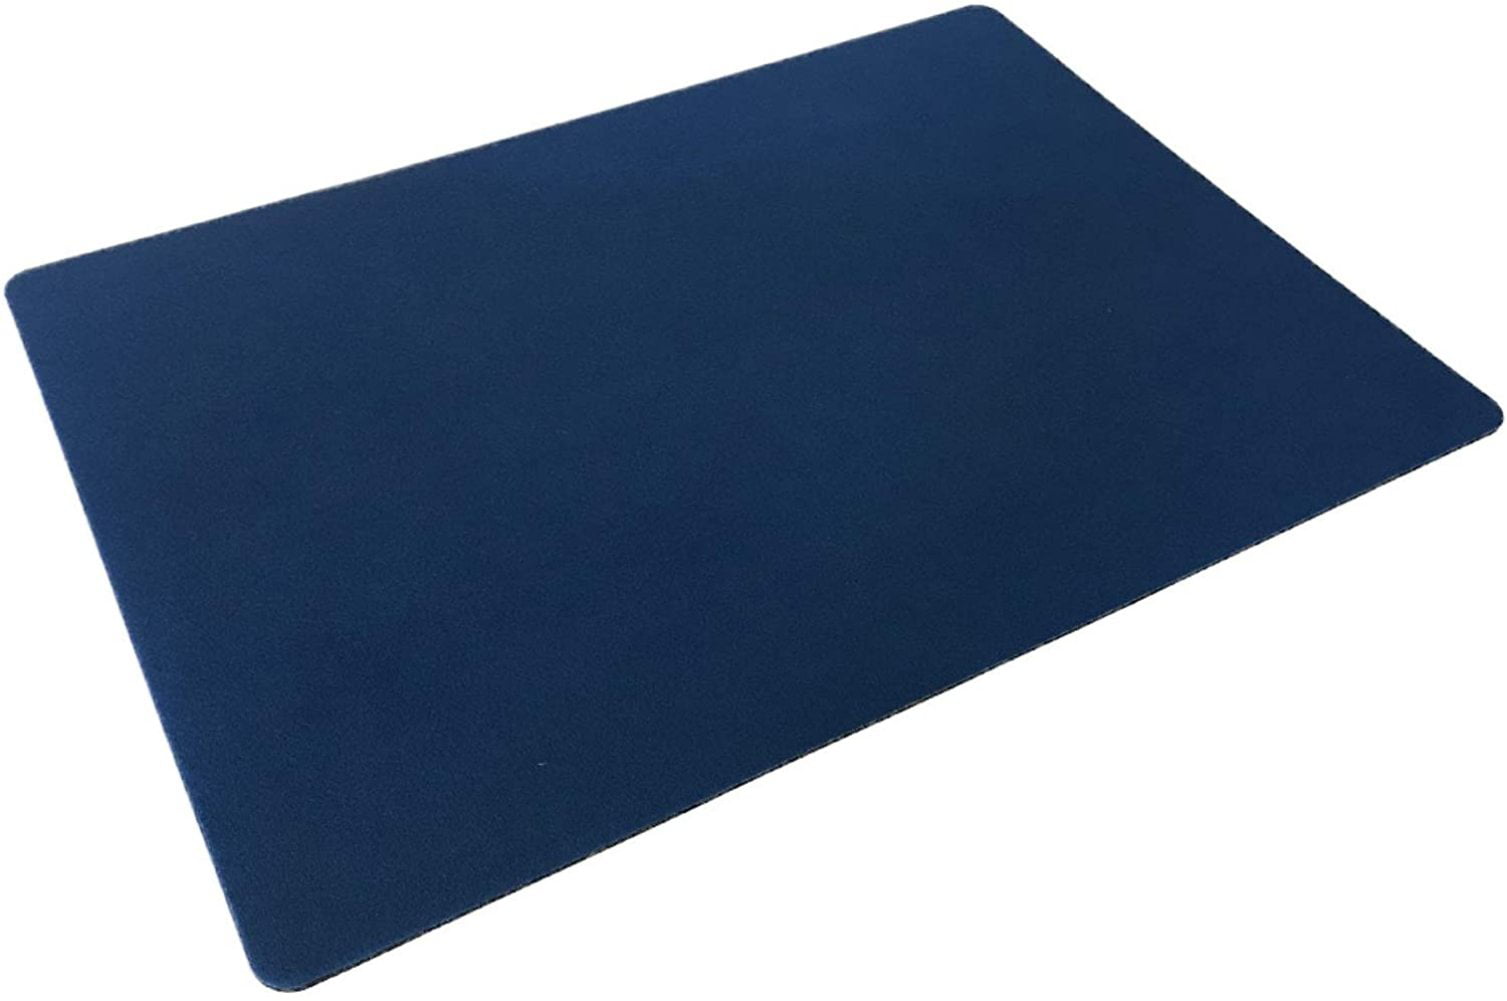 Standard Blue Close-up Magic Pad Non-Slip Grip Table Mat 16 by 23 Inches 